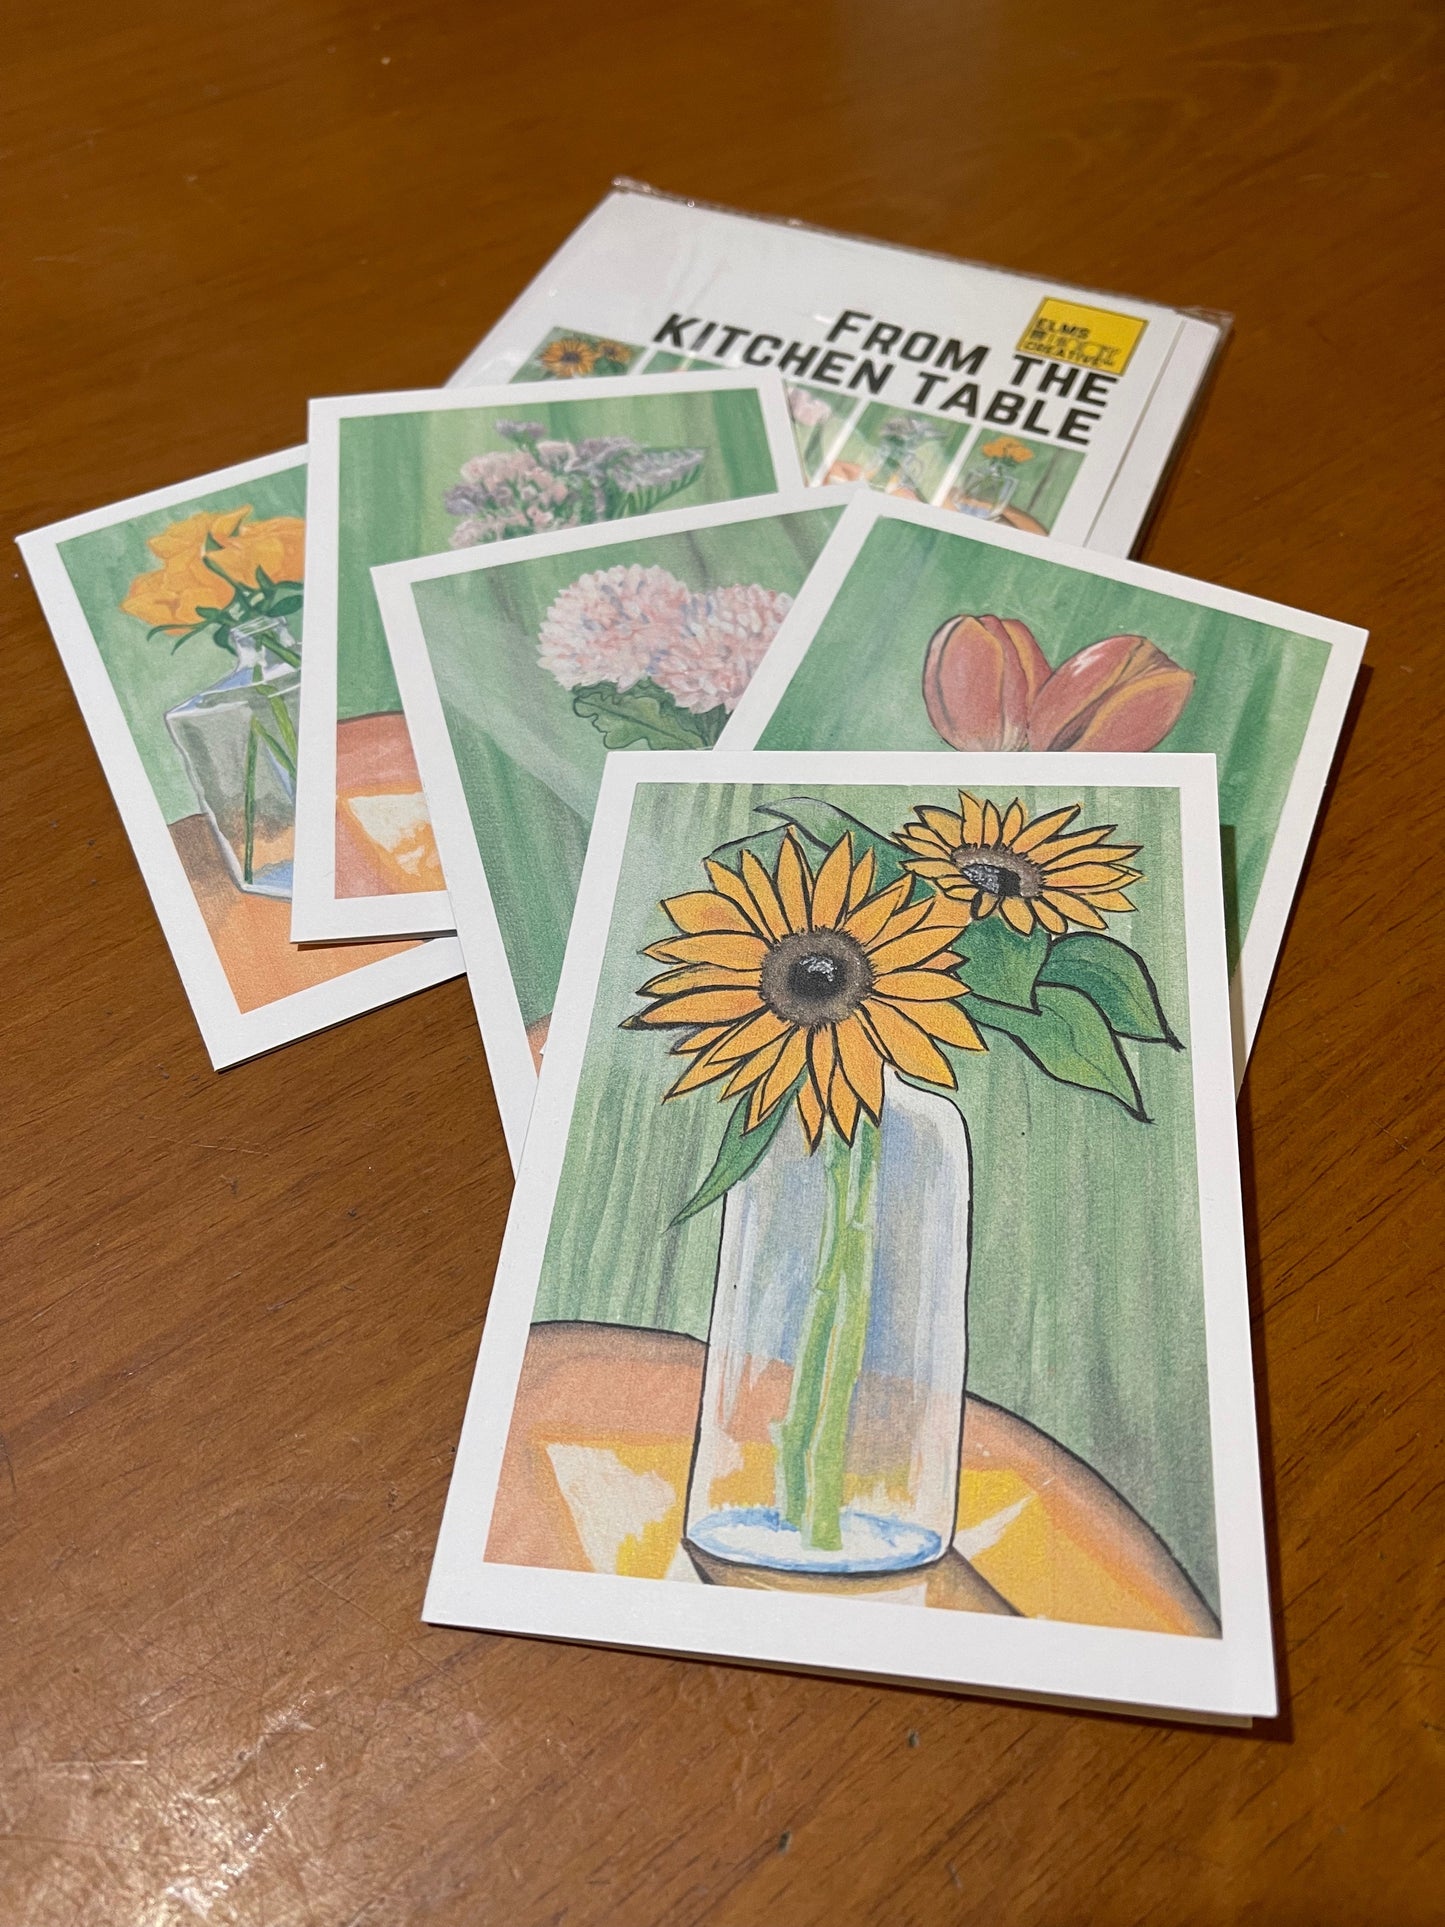 "From the Kitchen Table" - Floral Still Life Card - Sunflowers - ElmsCreative